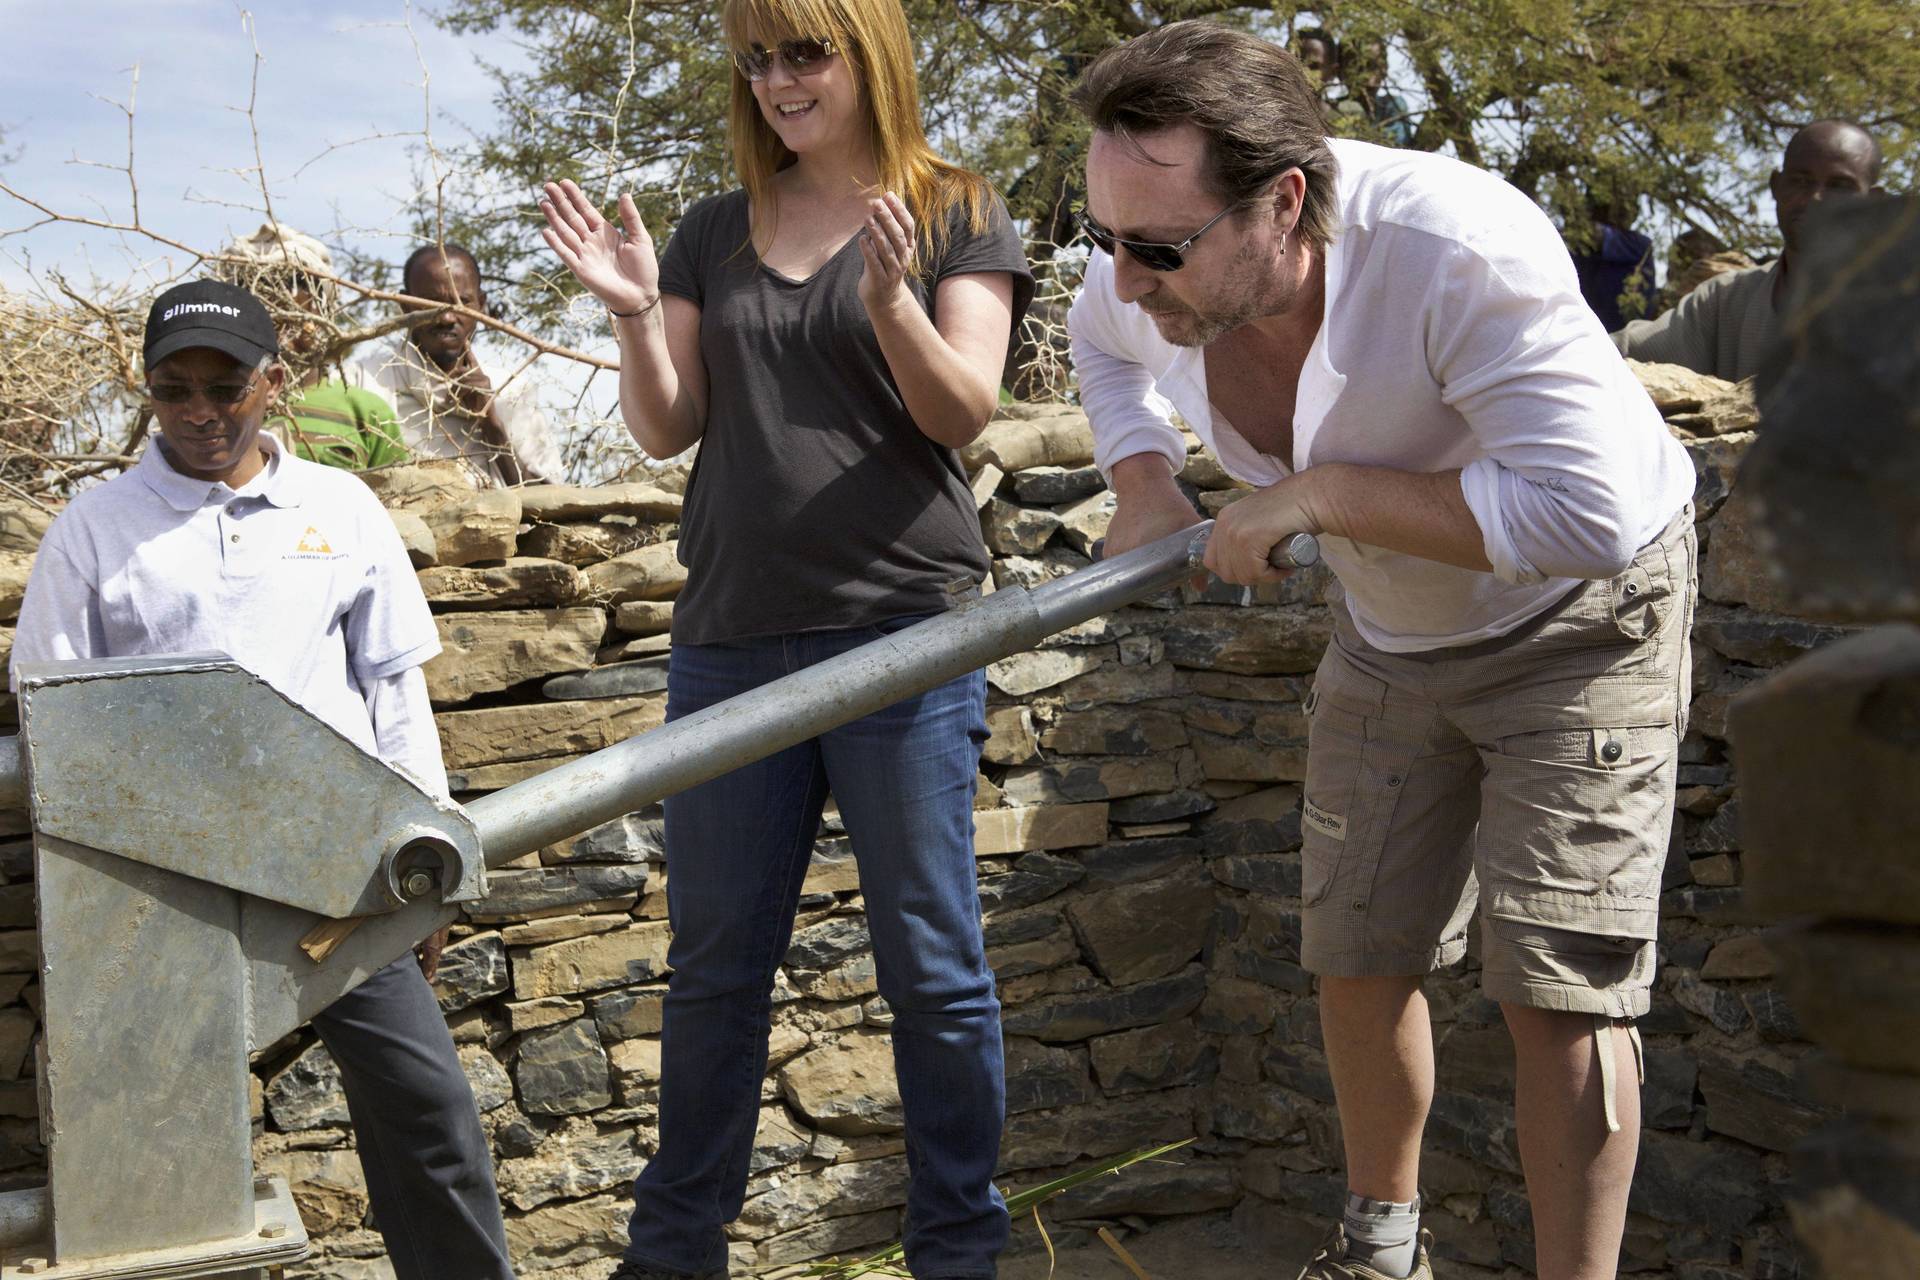 Blue Chip Foundation and Julian Lennon Open charity Water Well in Gobi, Ethiopia